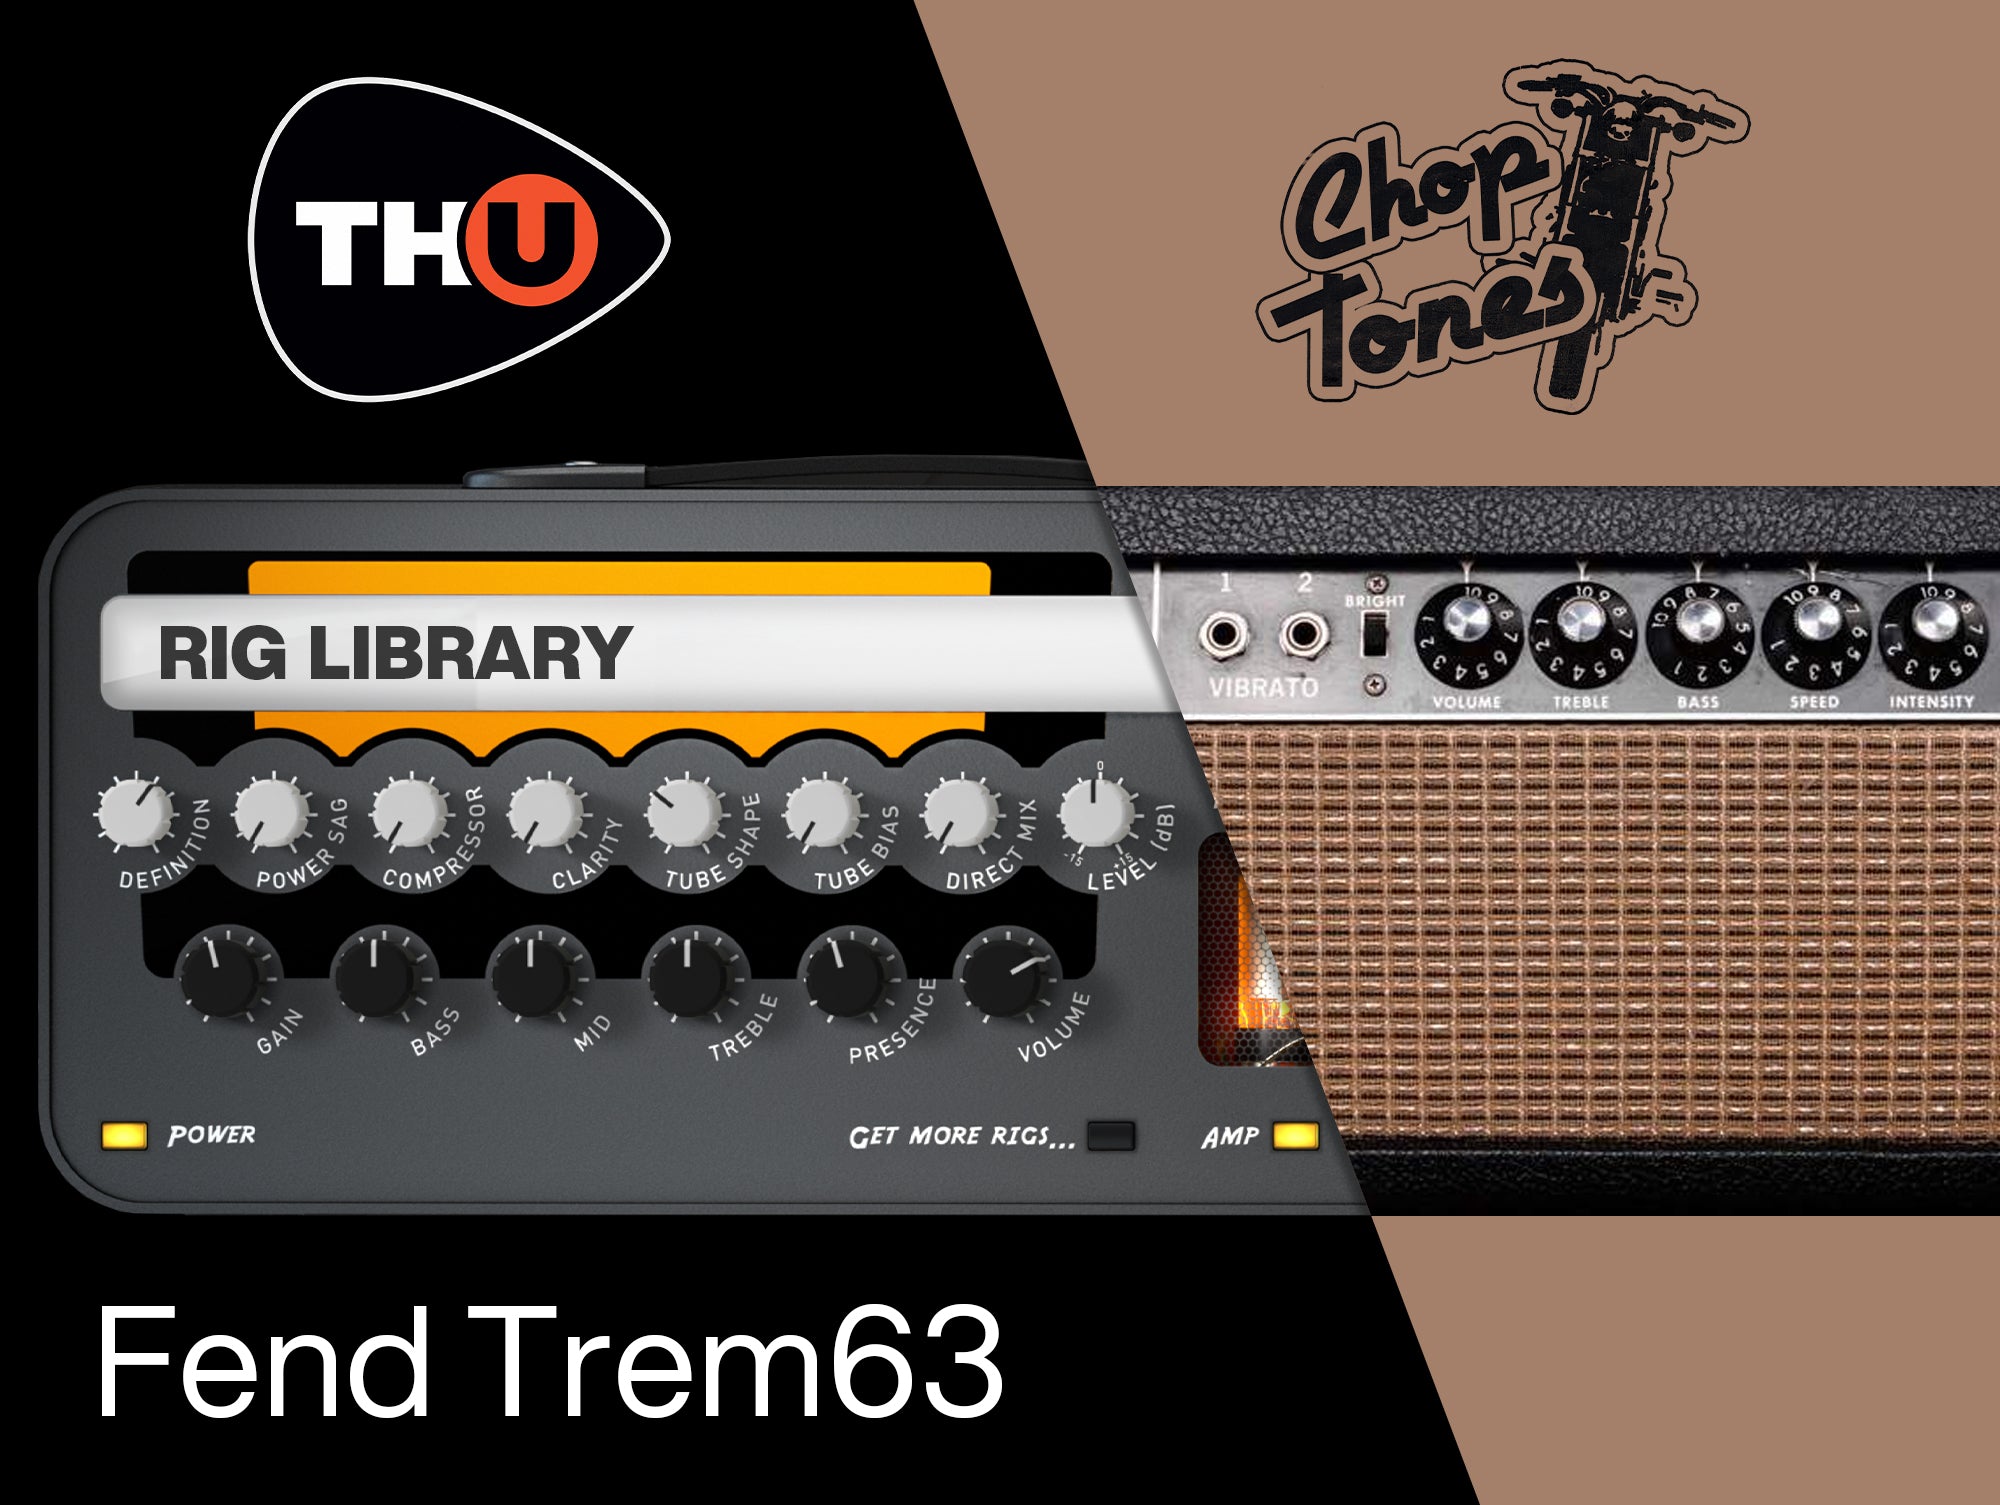 Overloud Fend Trem63 - Rig Library for TH-U